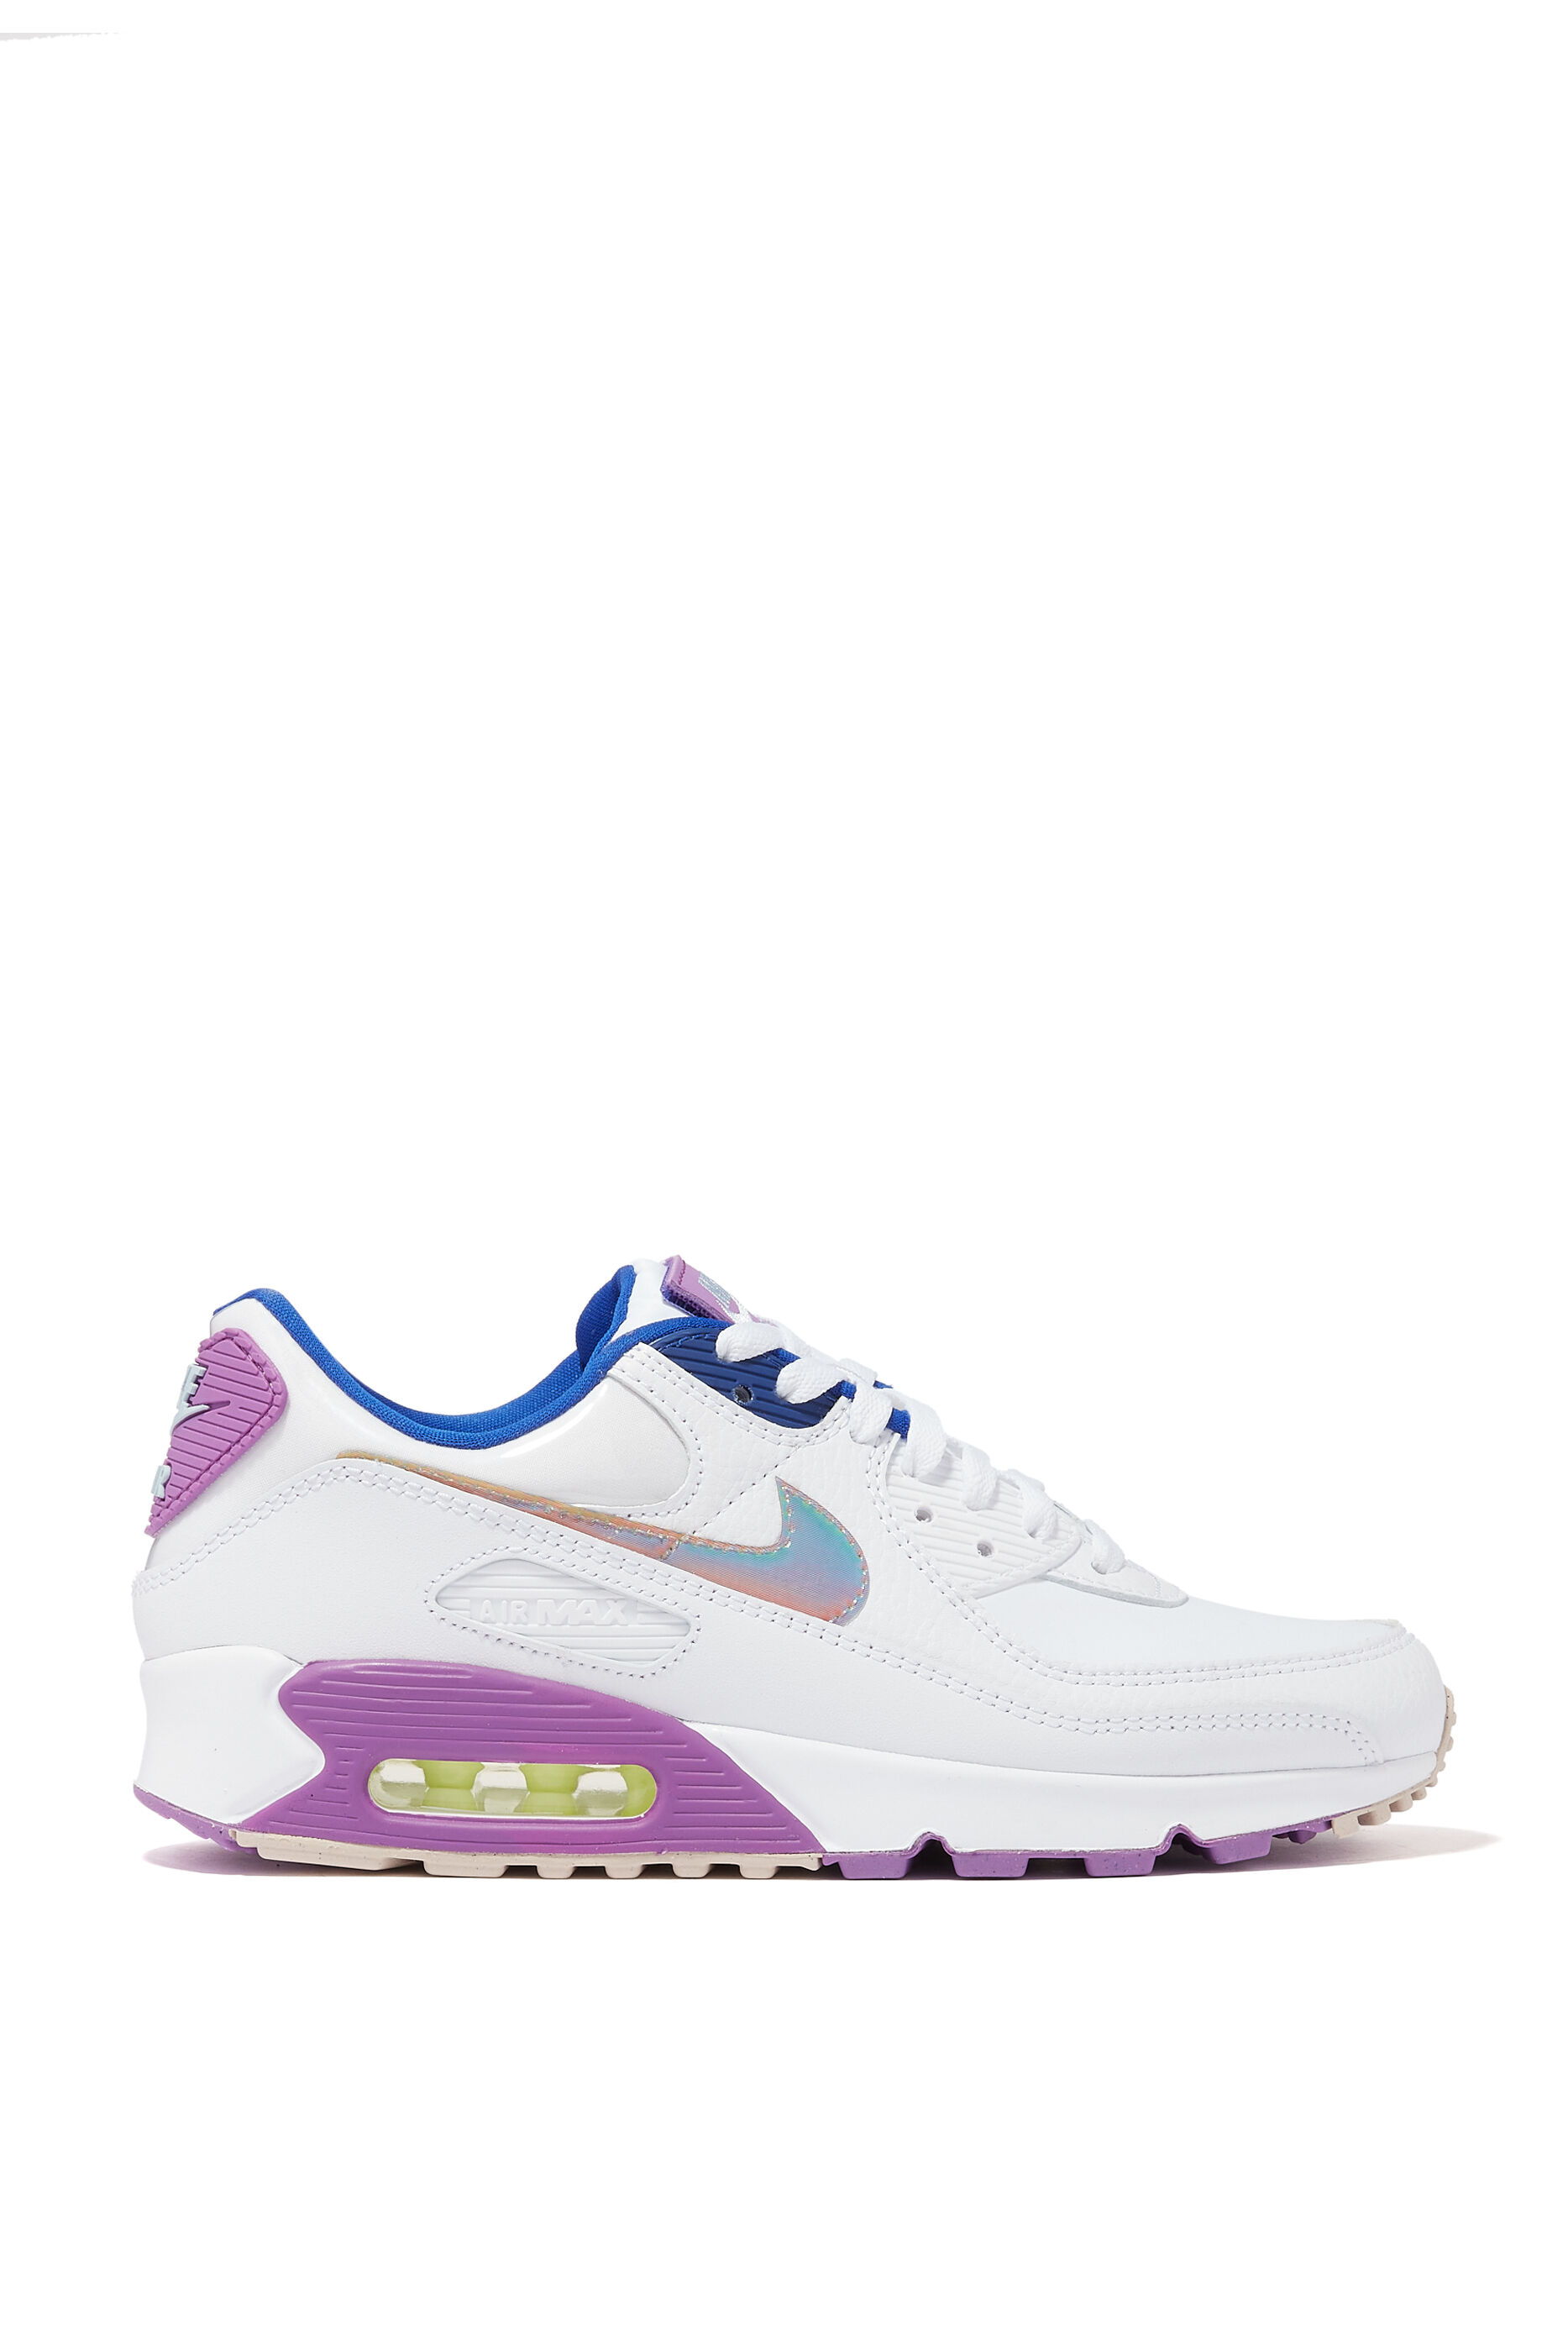 Buy Nike Air Max 90 SE Holographic 